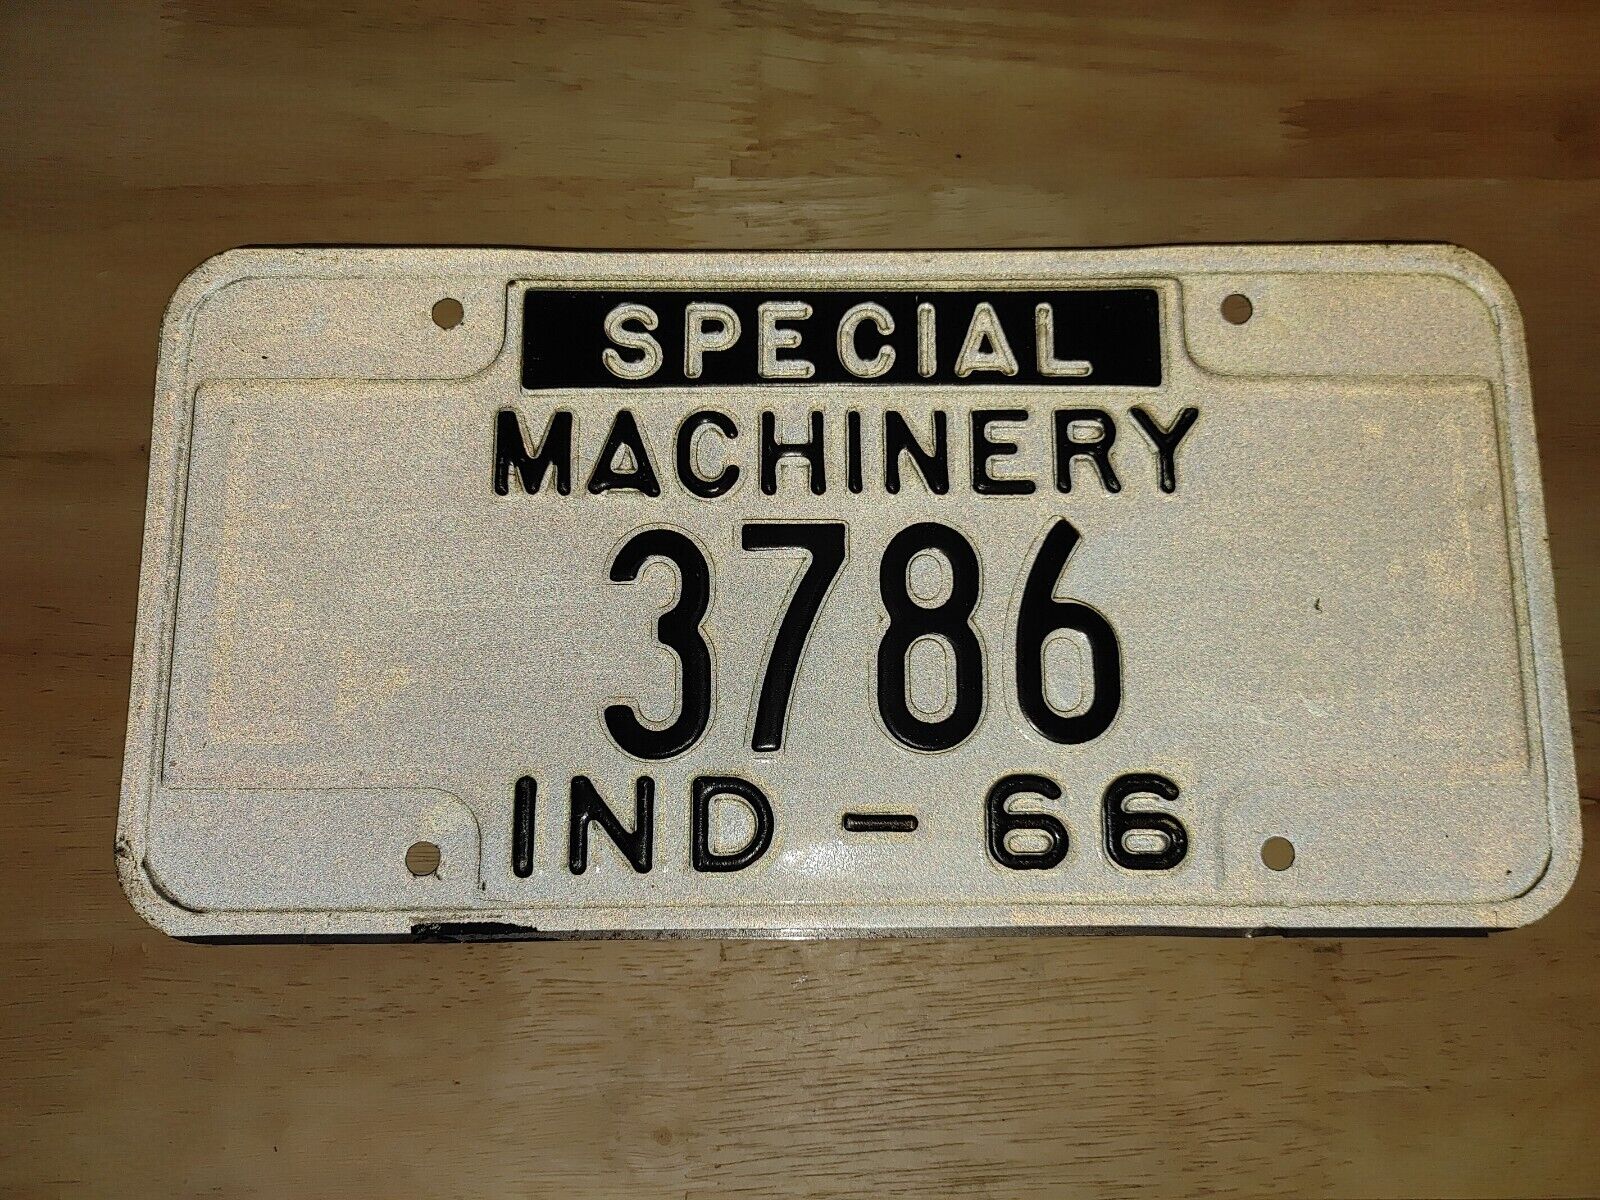 VTG 1966 INDIANA SPECIAL MACHINERY LICENSE PLATE #6786 IND-66 BLACK WHITE NICE